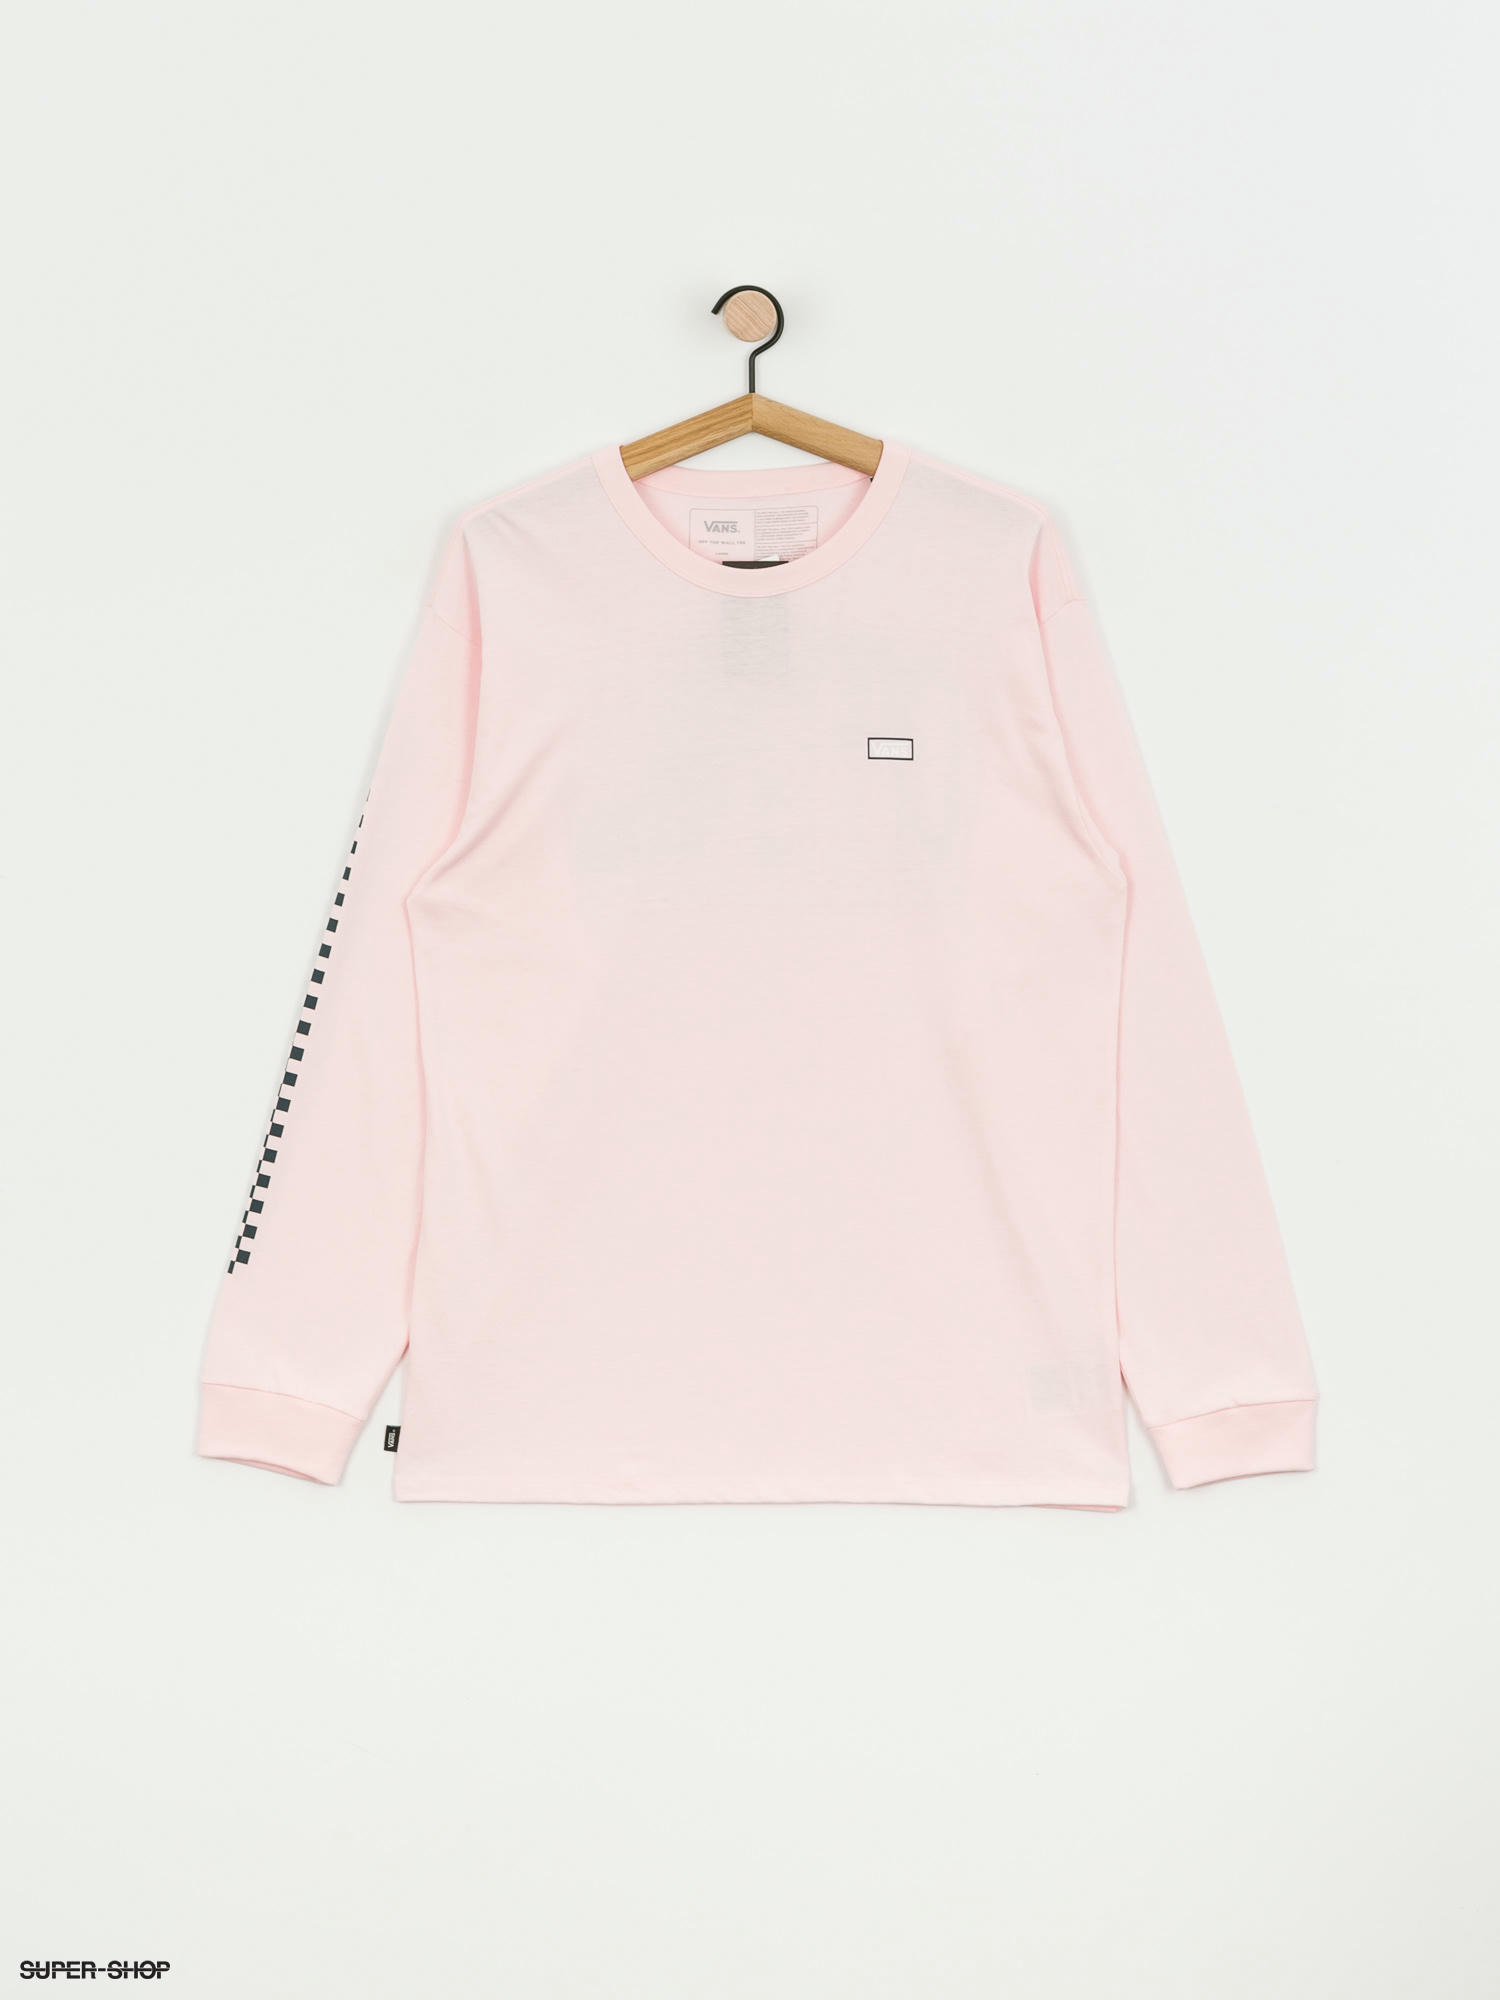 Vans Off The Wall Classic Longsleeve (cool pink)